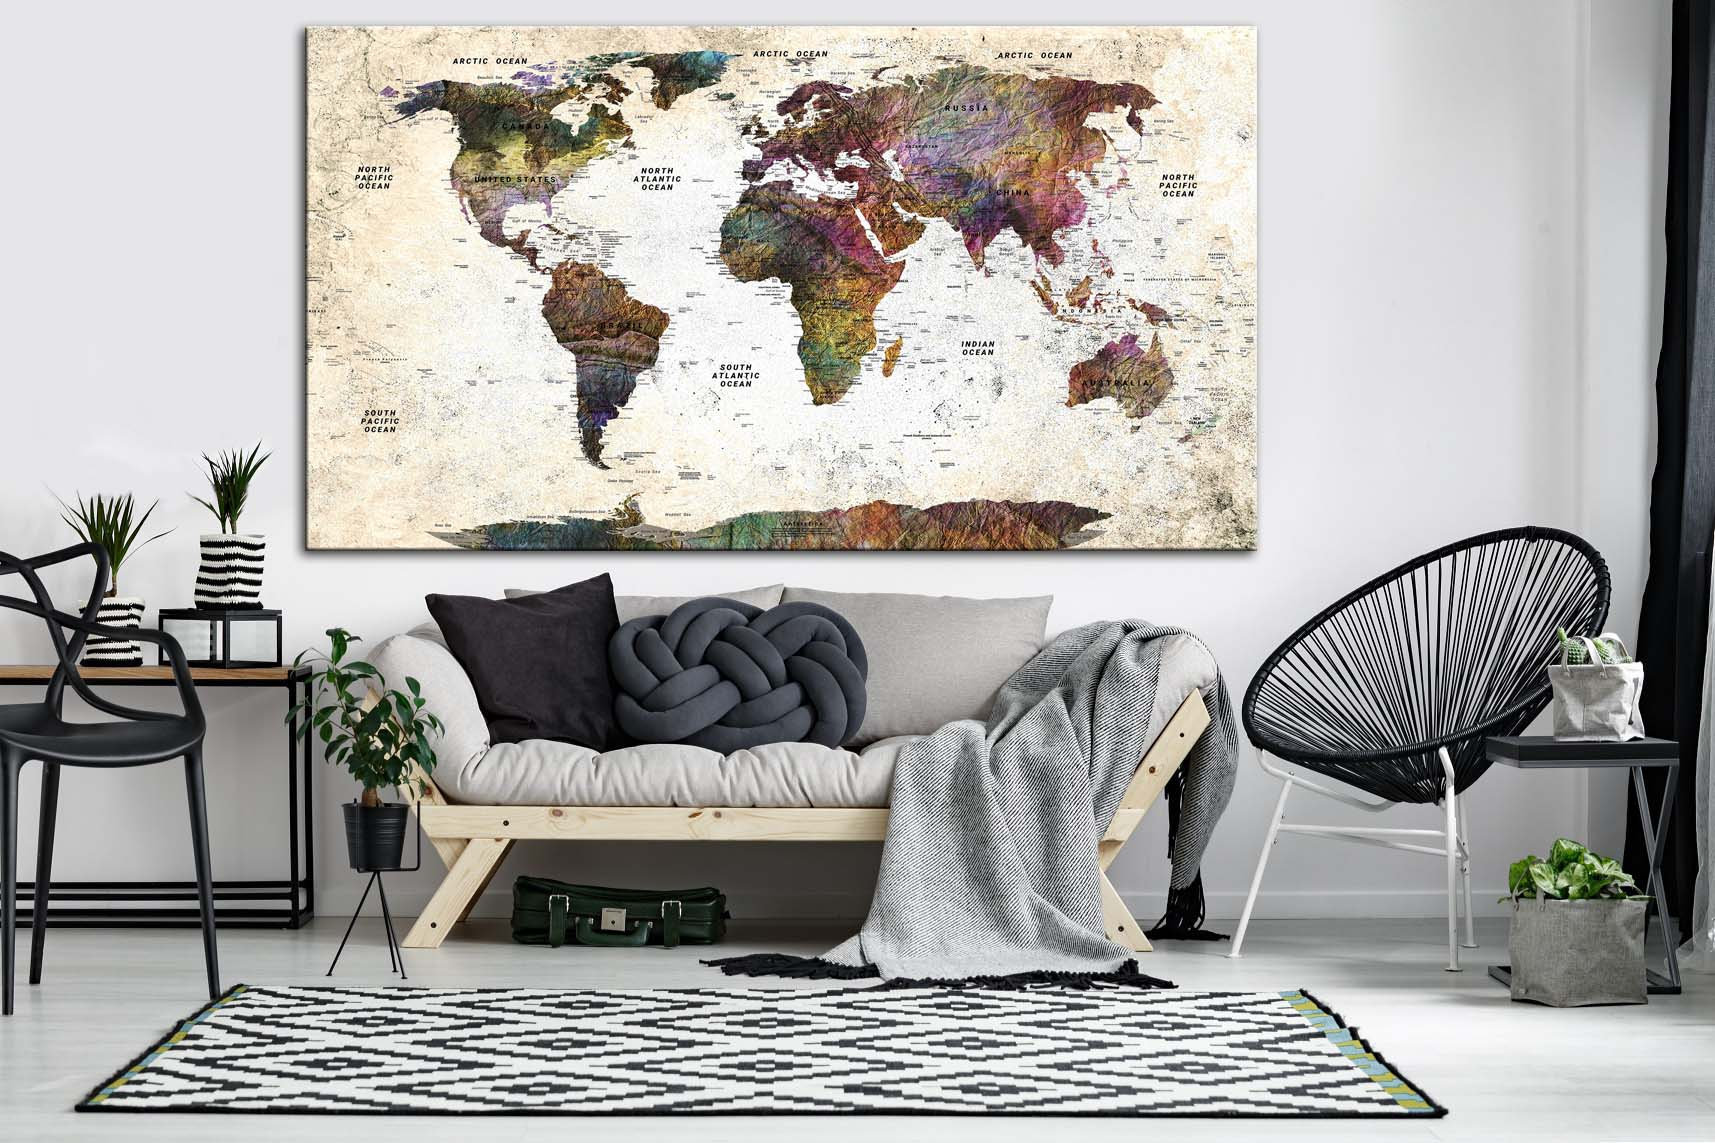 900x600mm/A1/A2 Vintage Map Poster Print Retro Hanging Picture Home Office  Decor